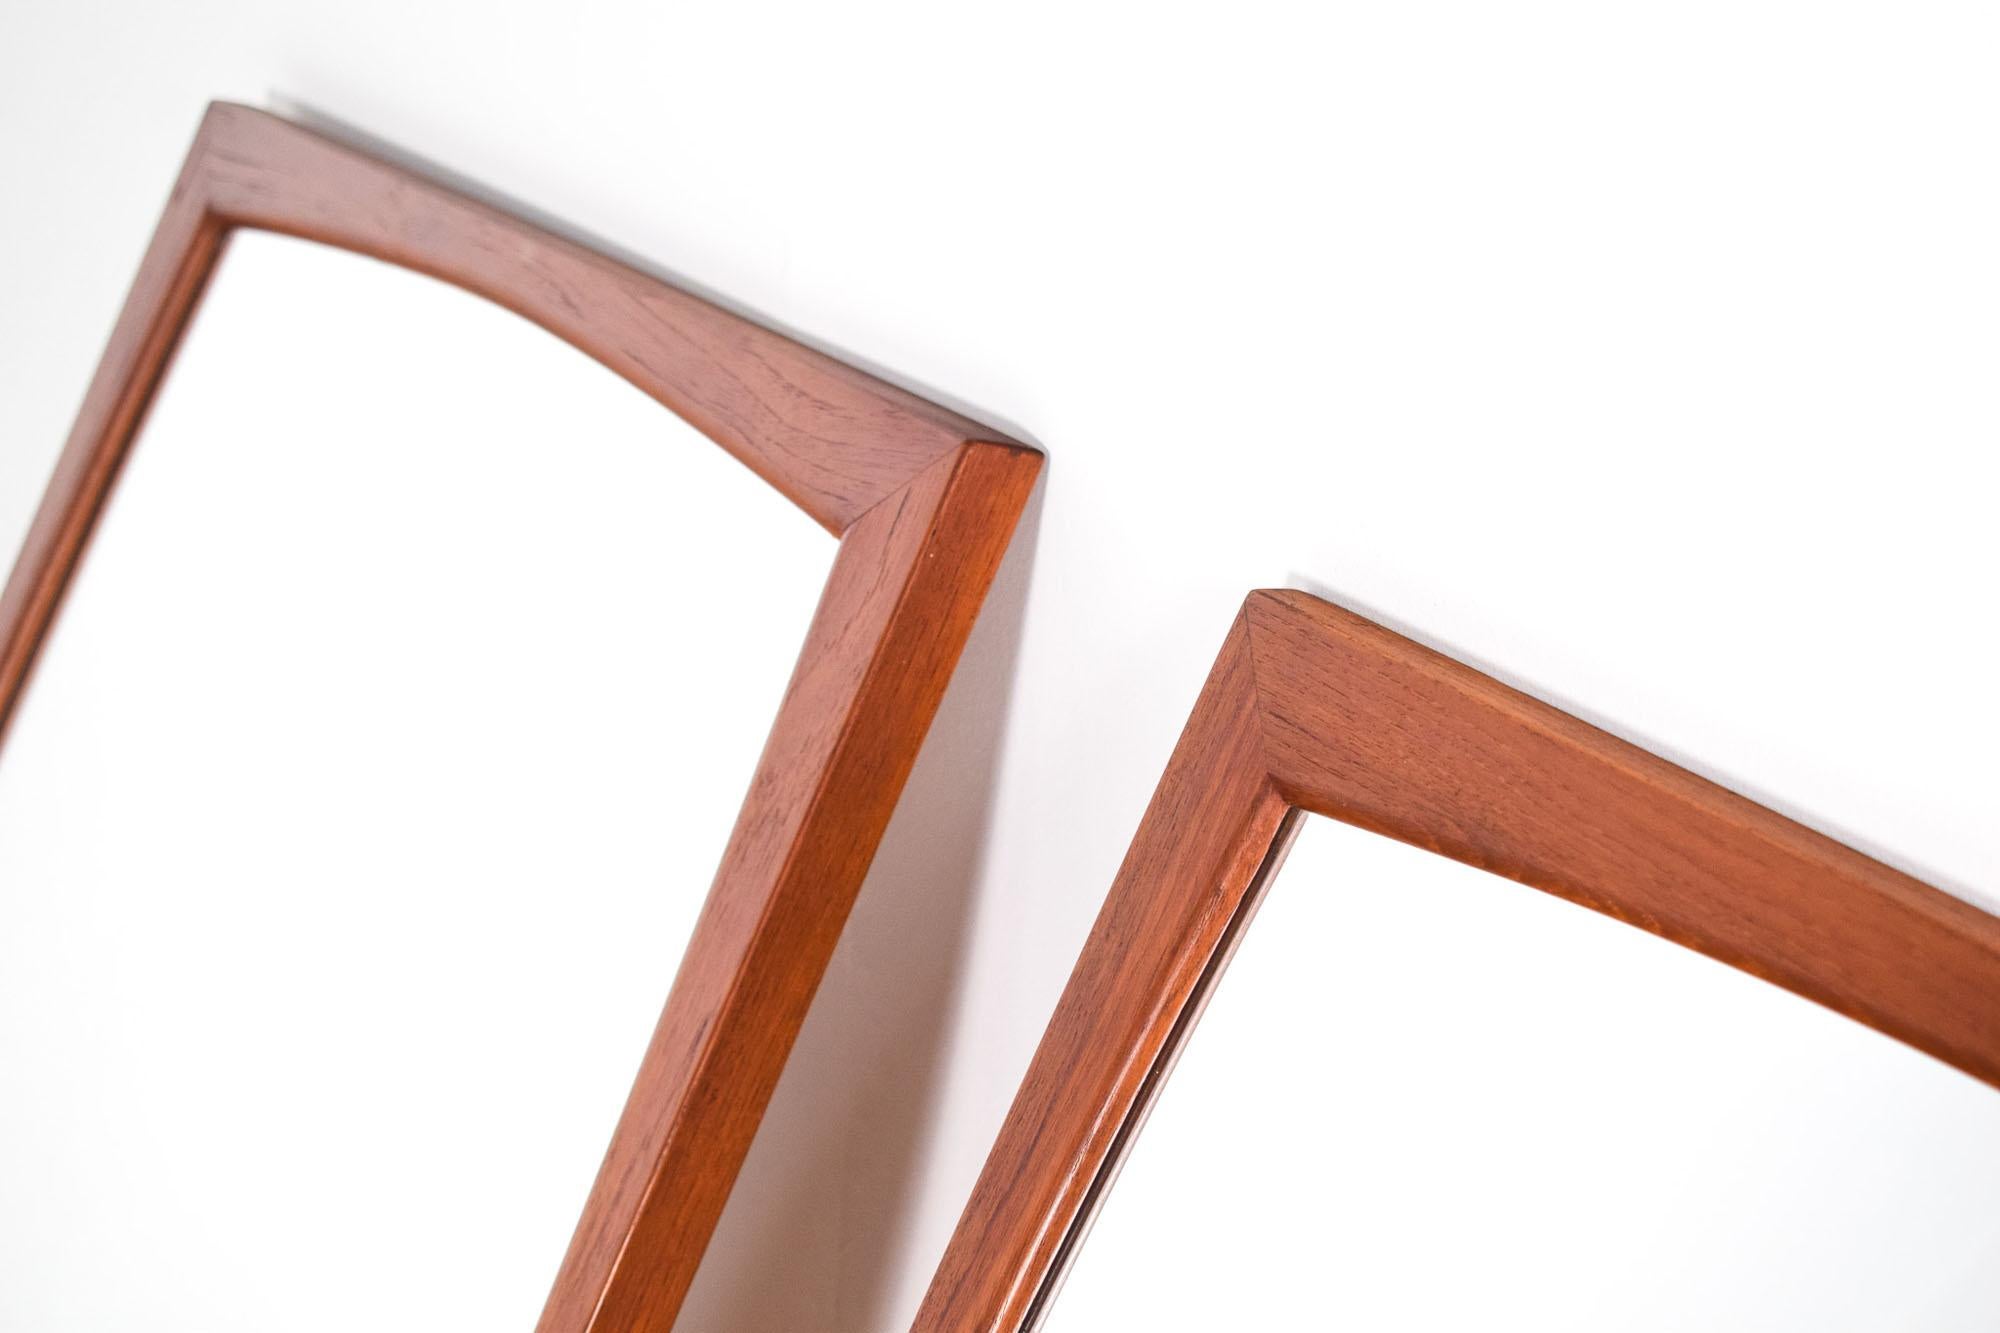 Mid Century pair of teak mirrors, a classic example of Scandinavian design, crafted by Aksel Kjersgaard and produced by his company, Aksel Kjersgaard Odder, in the 1960s in Denmark. These mirrors, identifiable as model No 10, carry the mark of their